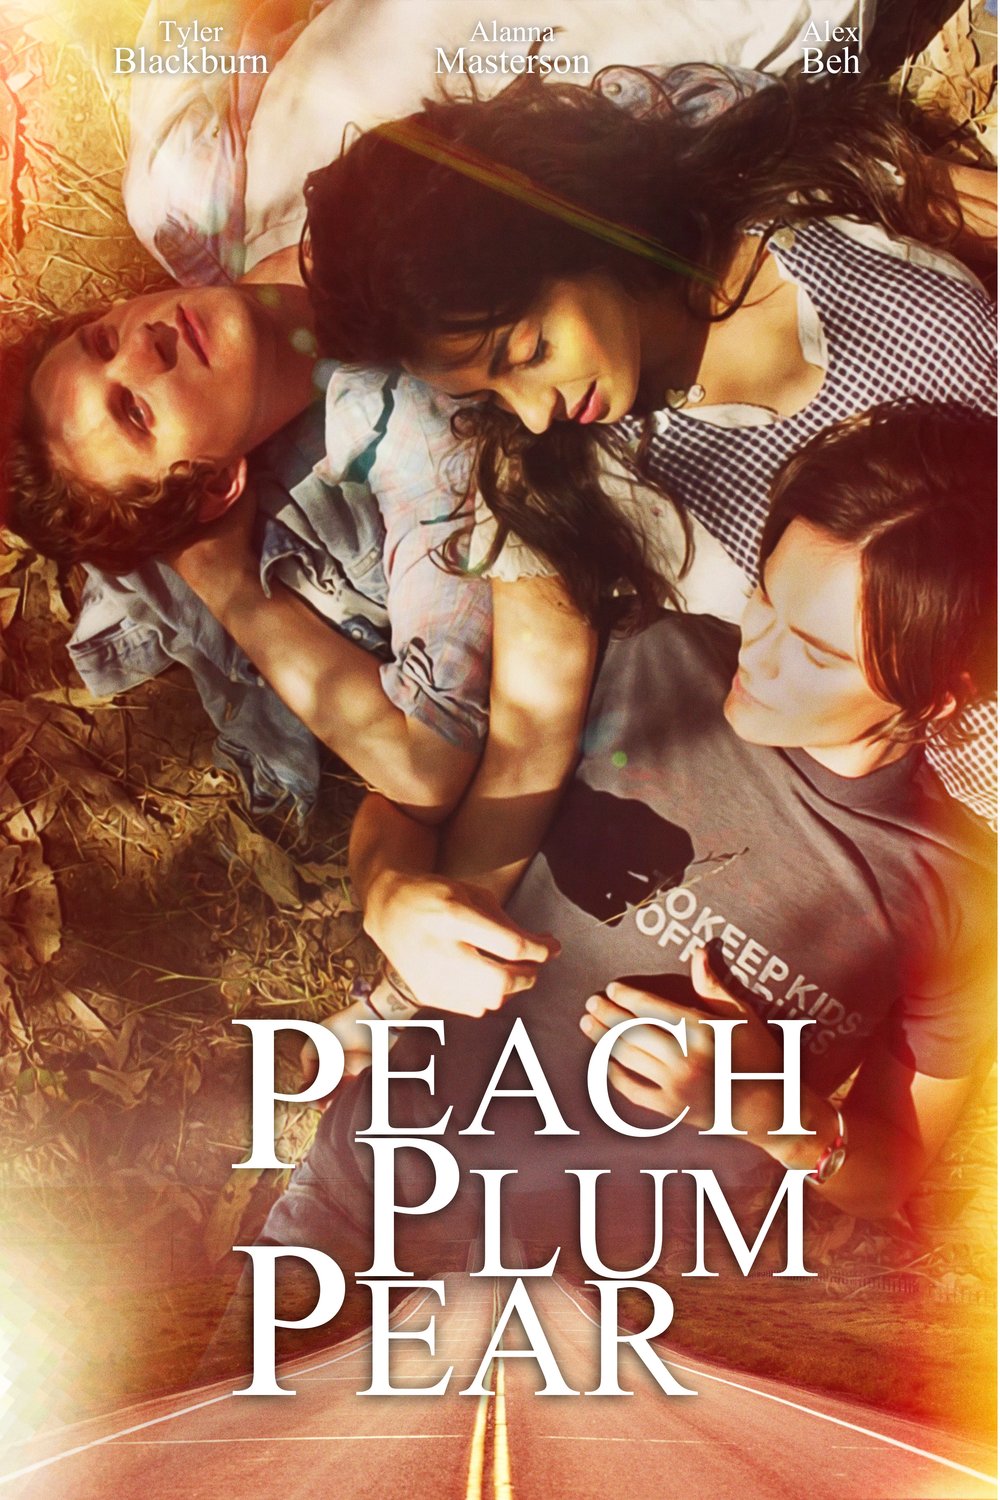 Poster of the movie Peach Plum Pear